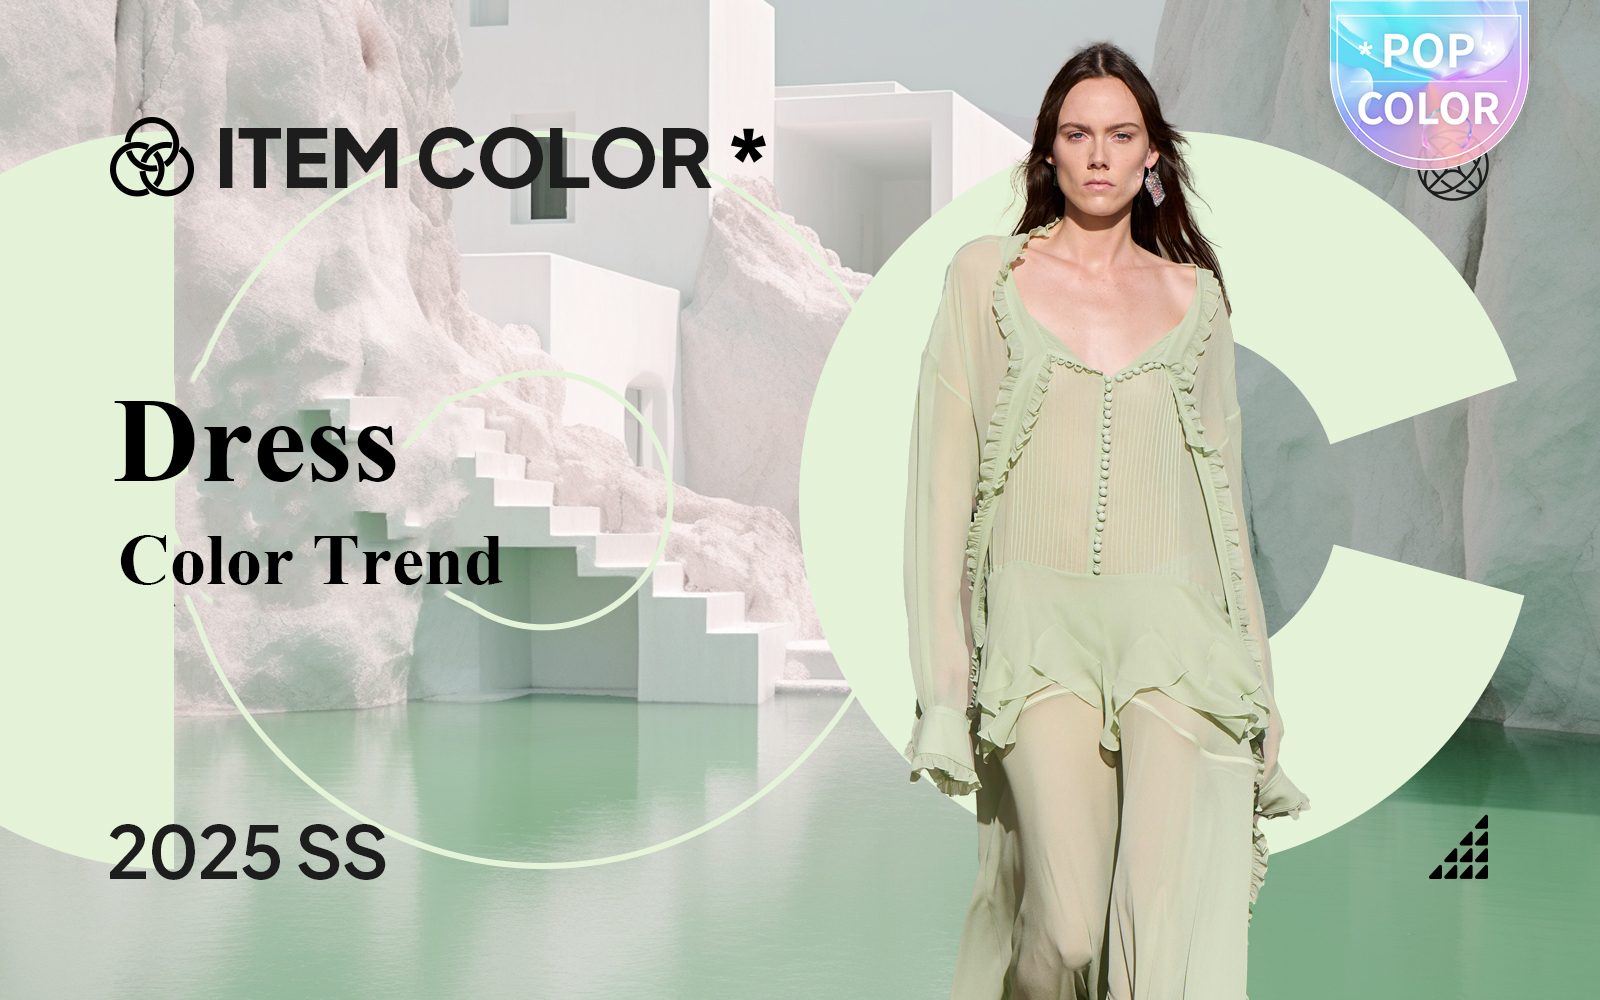 Cool and Elegant -- The Color Trend for Women's Dress